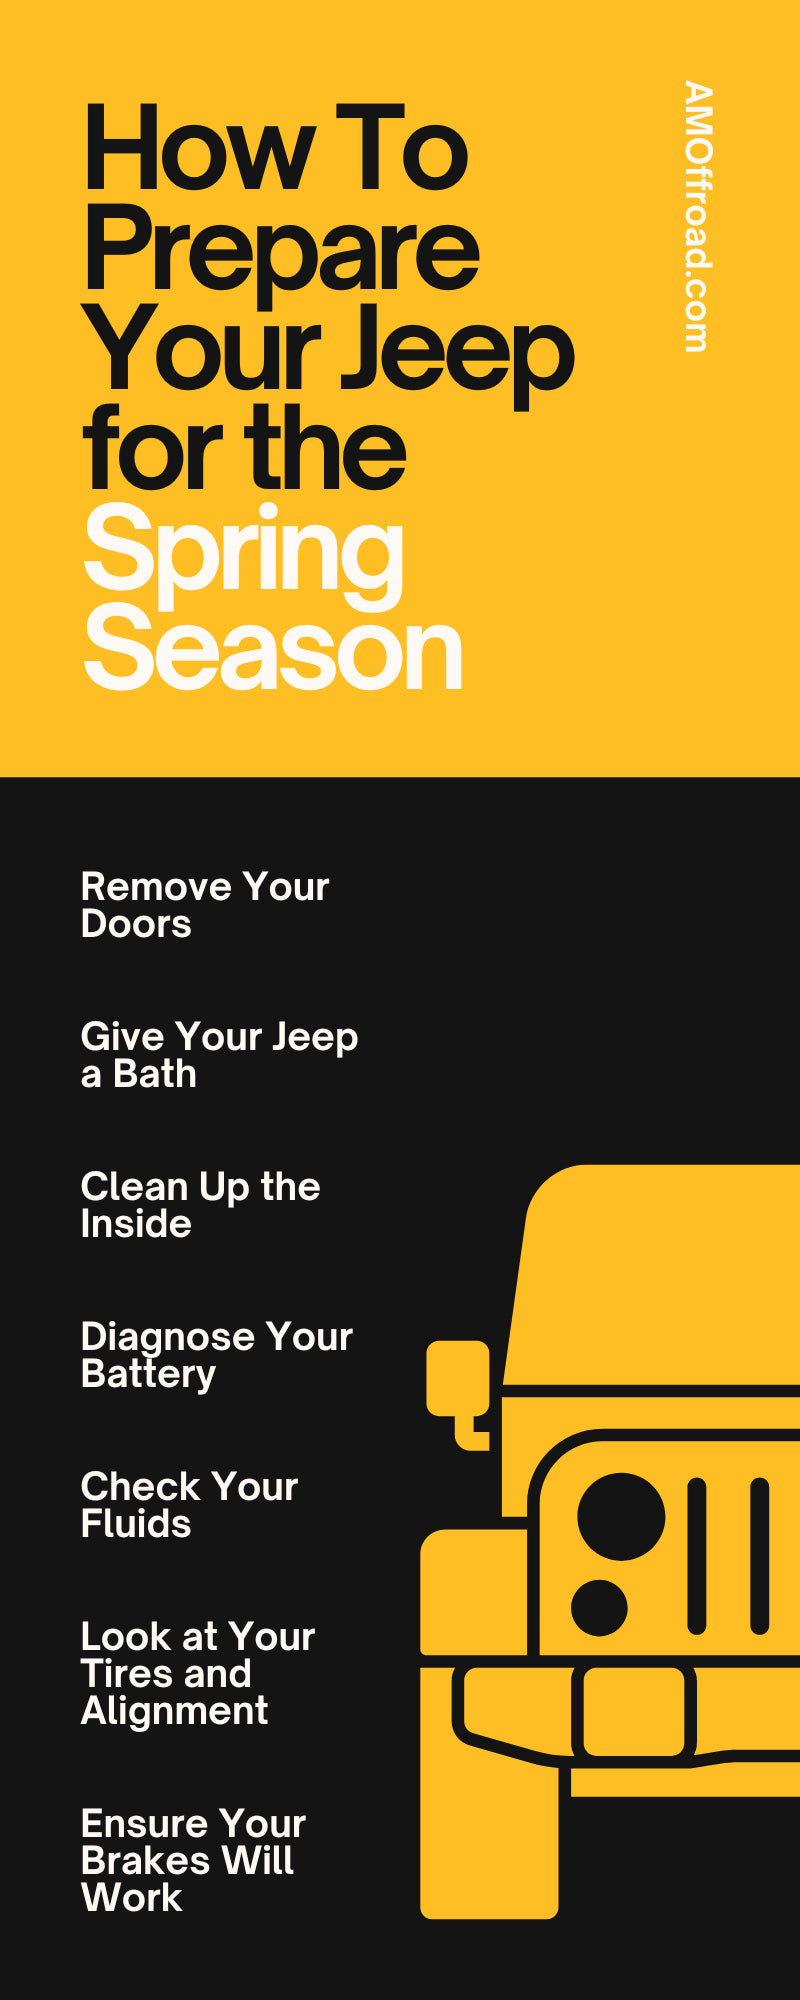 How To Prepare Your Jeep for the Spring Season